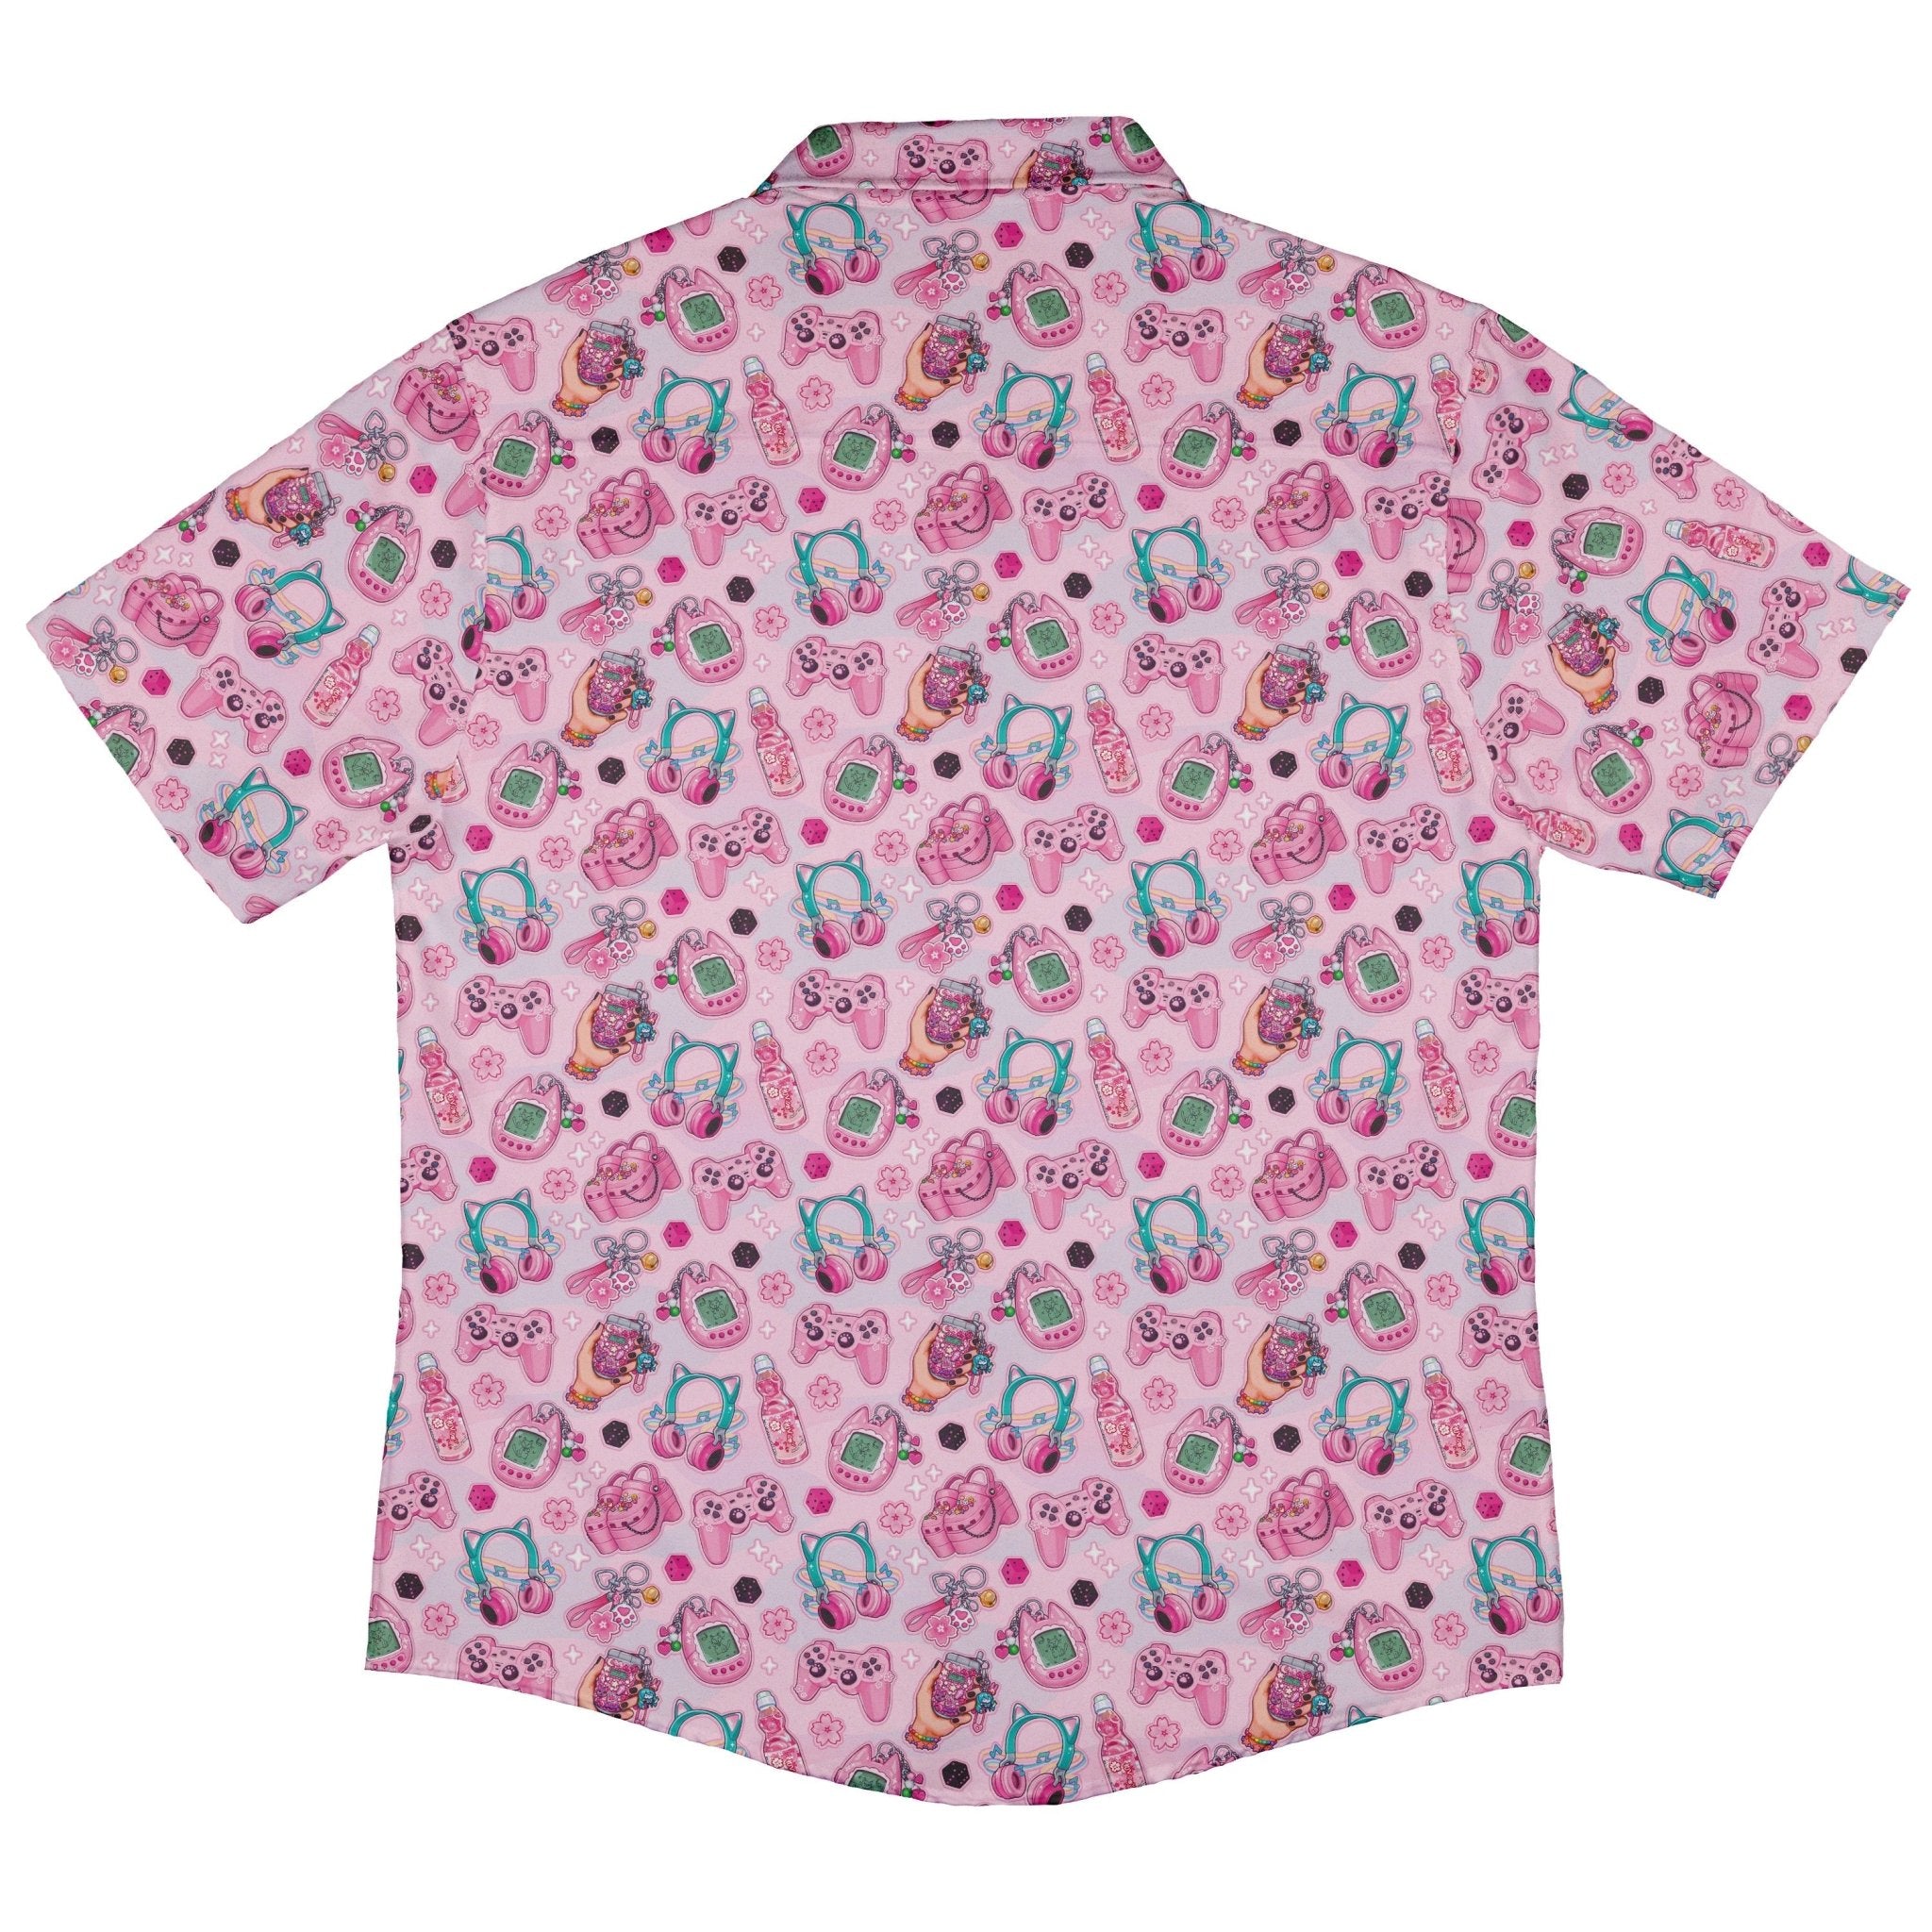 Anime Gamer Items Pink Button Up Shirt - adult sizing - Anime - Ivy Dolamore